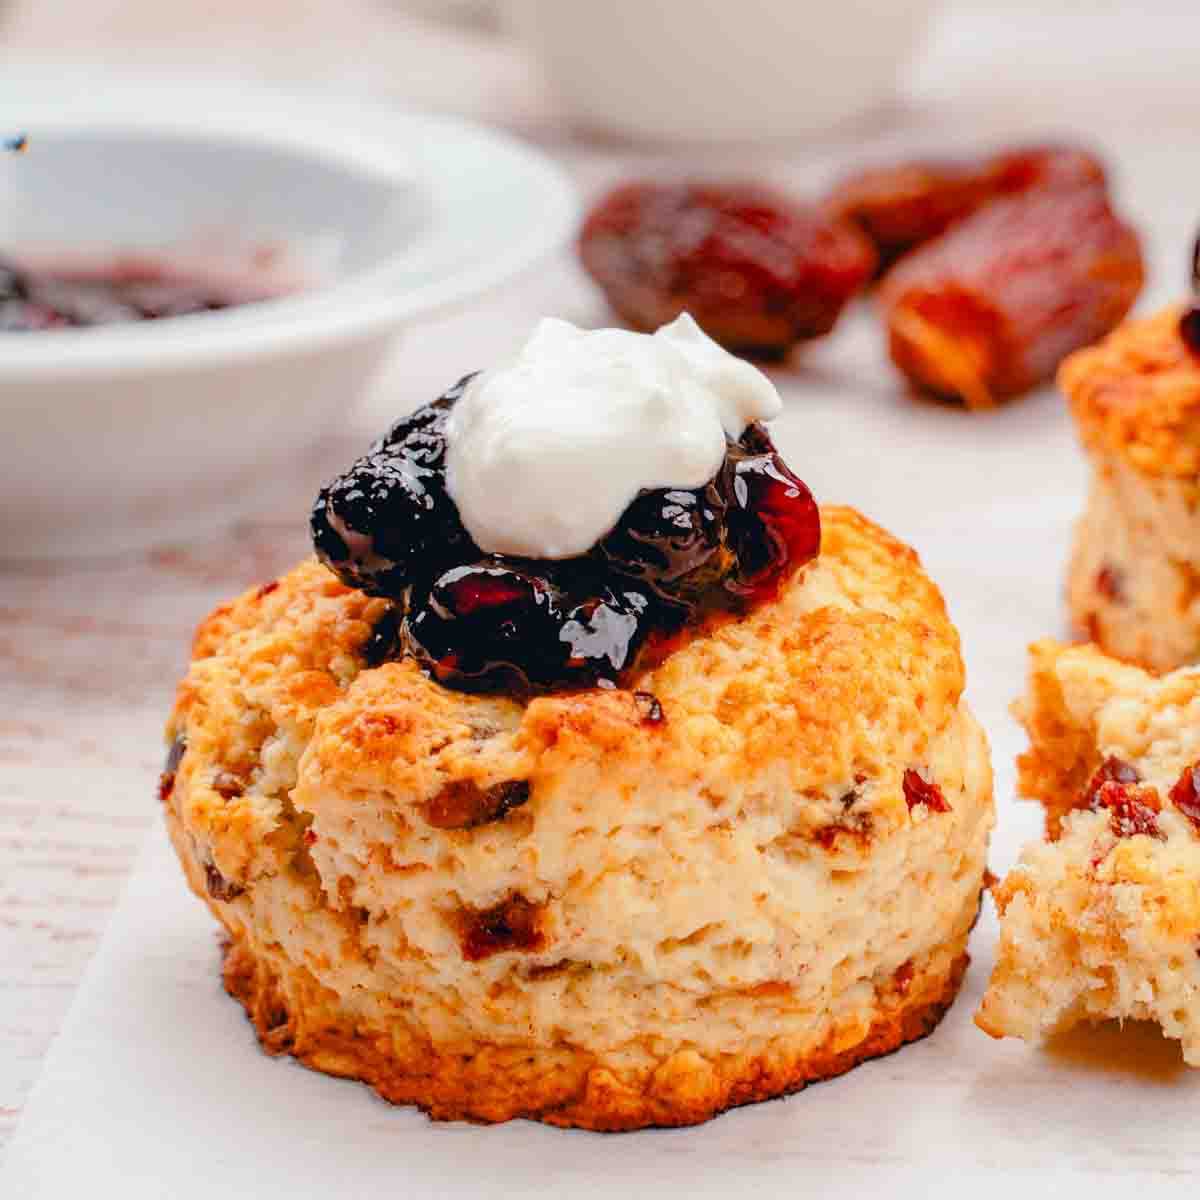 A date scone topped with jam and cream.